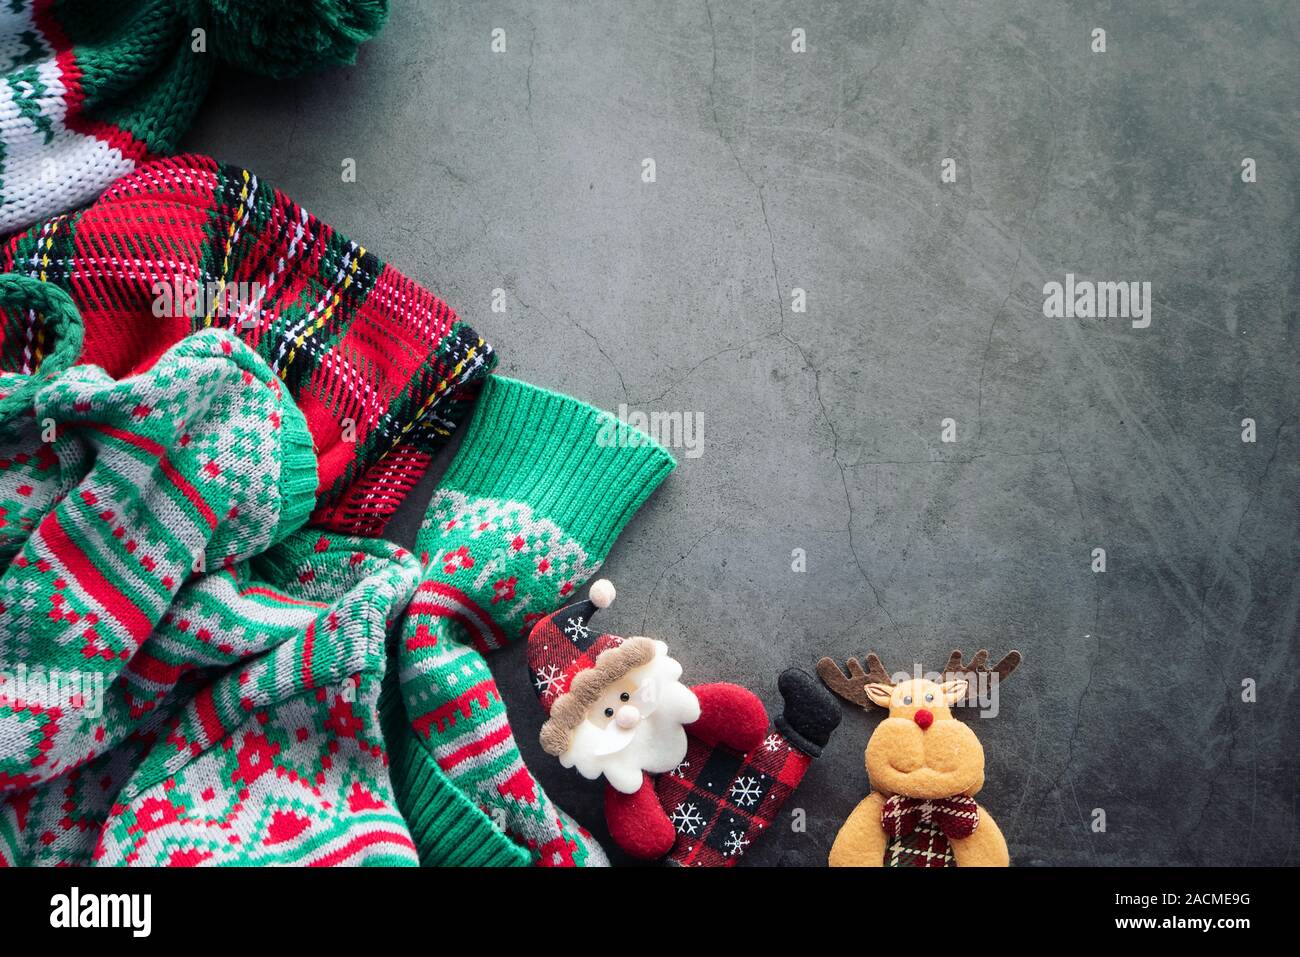 green sweater and red scotch blanket laying on the cement background with a Santa Claus doll and a reindeer for Christmas ornament with copy space Stock Photo